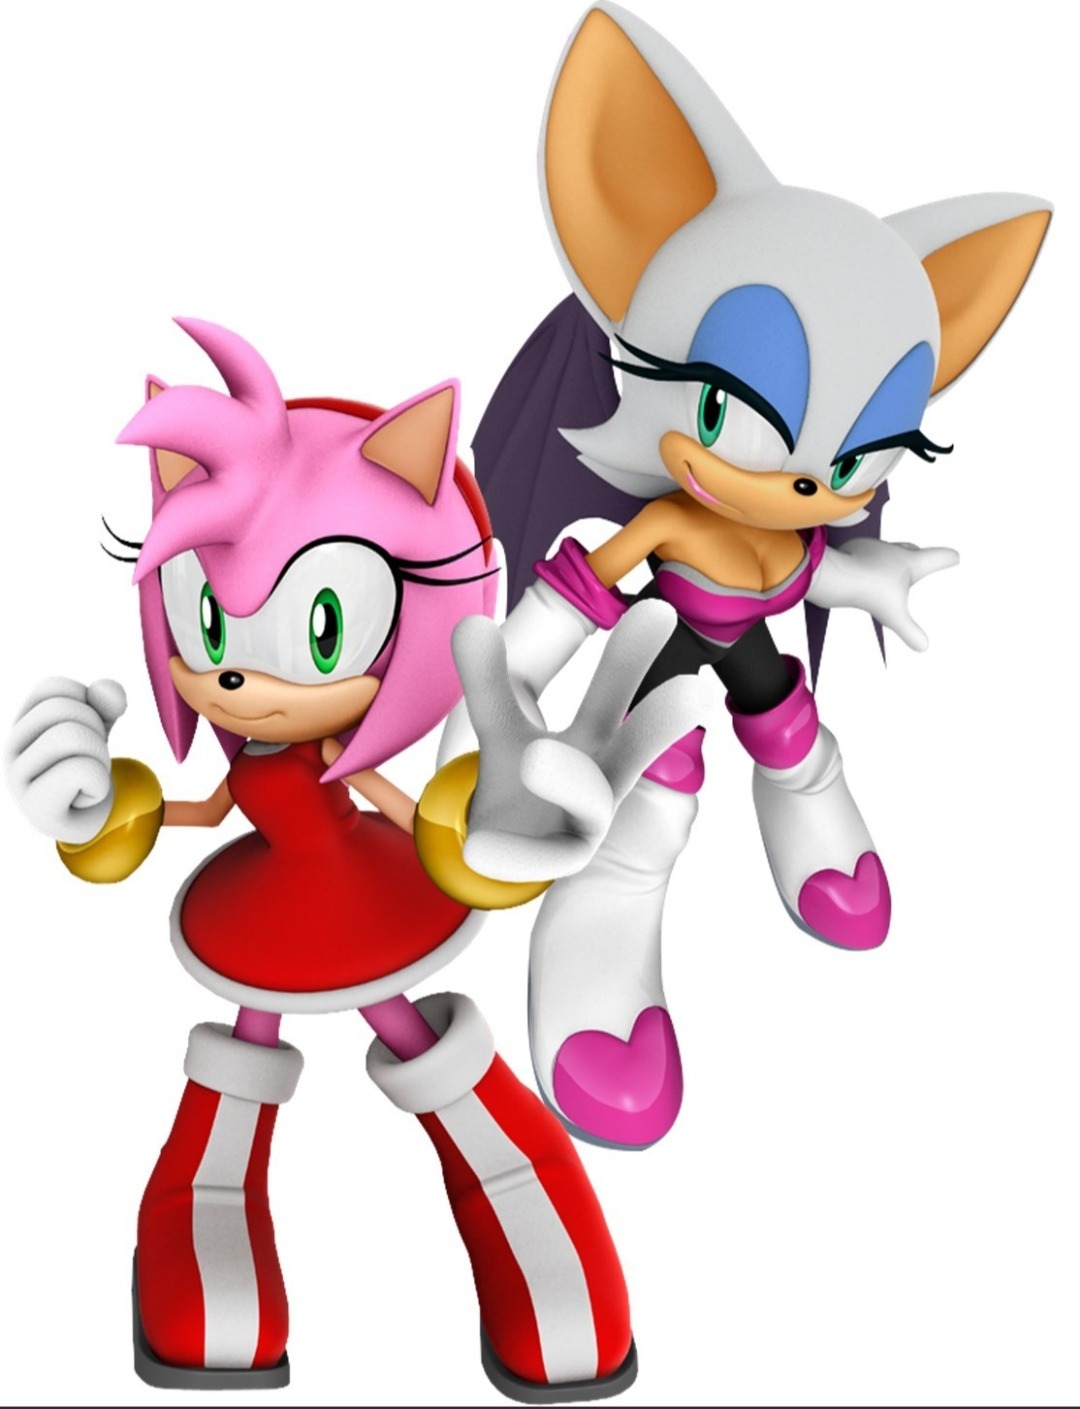 Sonic and Amy Rose Play Would You Rather? (SonAmy Story) ❤️ 